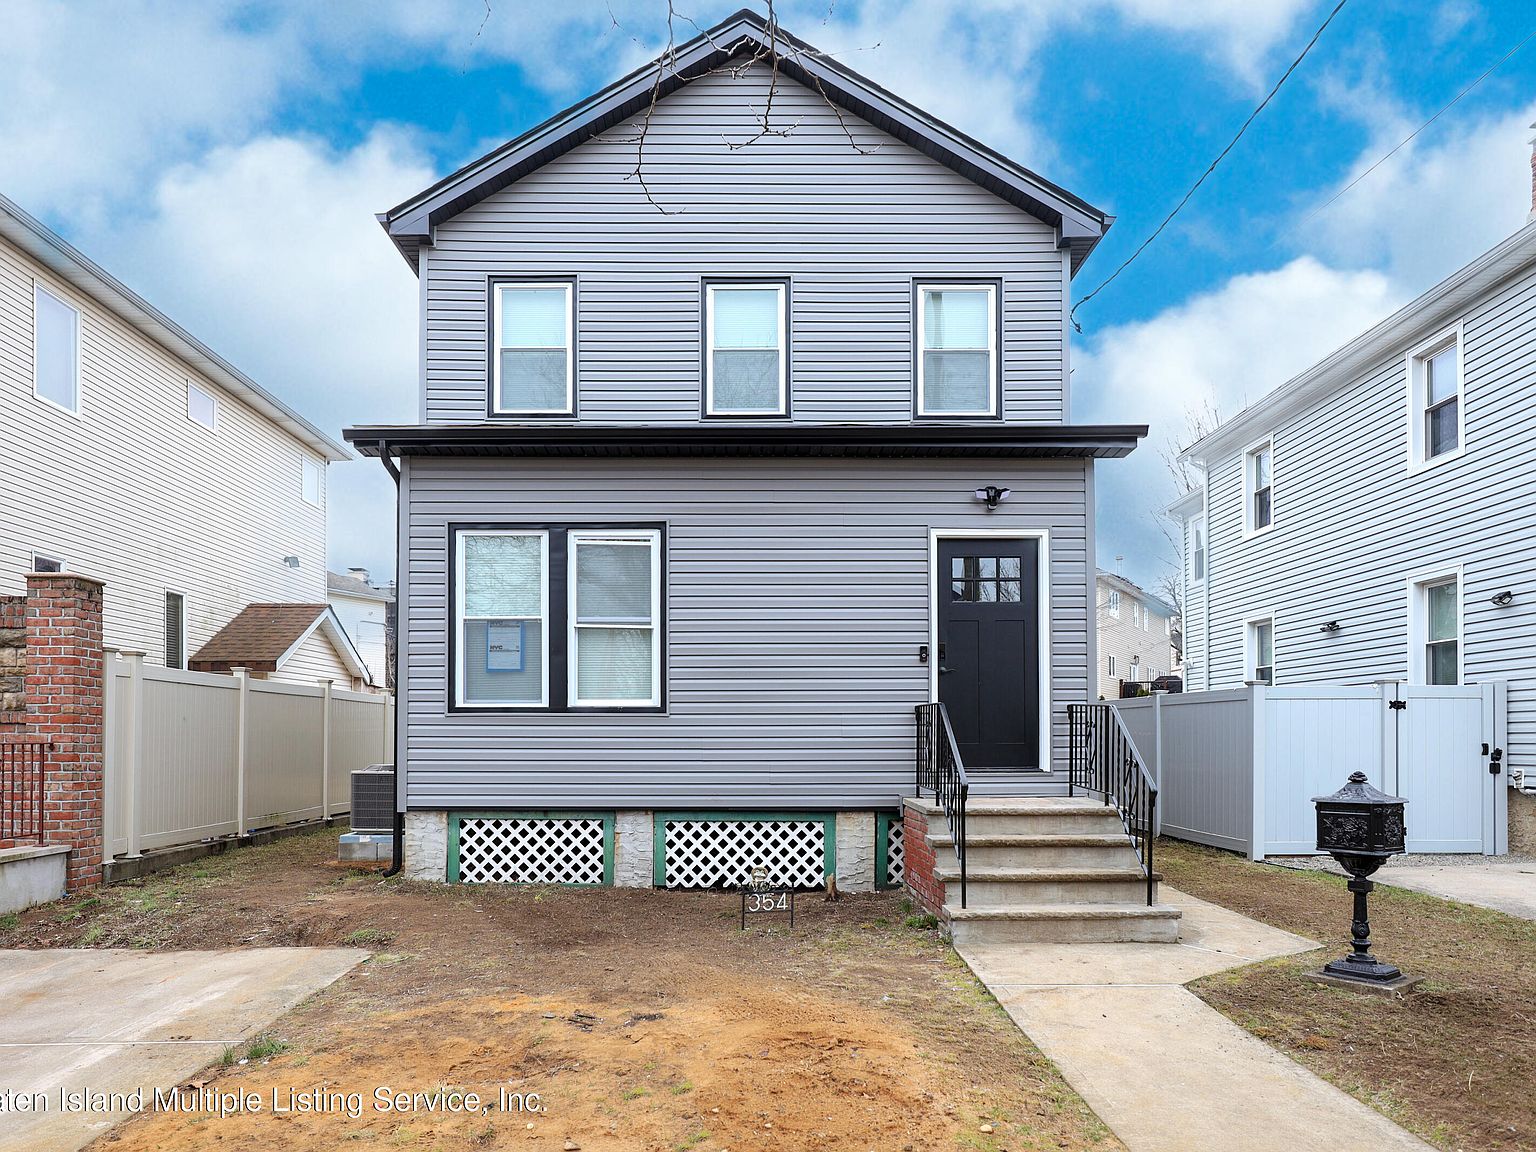 354 Sleight Ave, Staten Island, NY 10307 | MLS #1160351 | Zillow